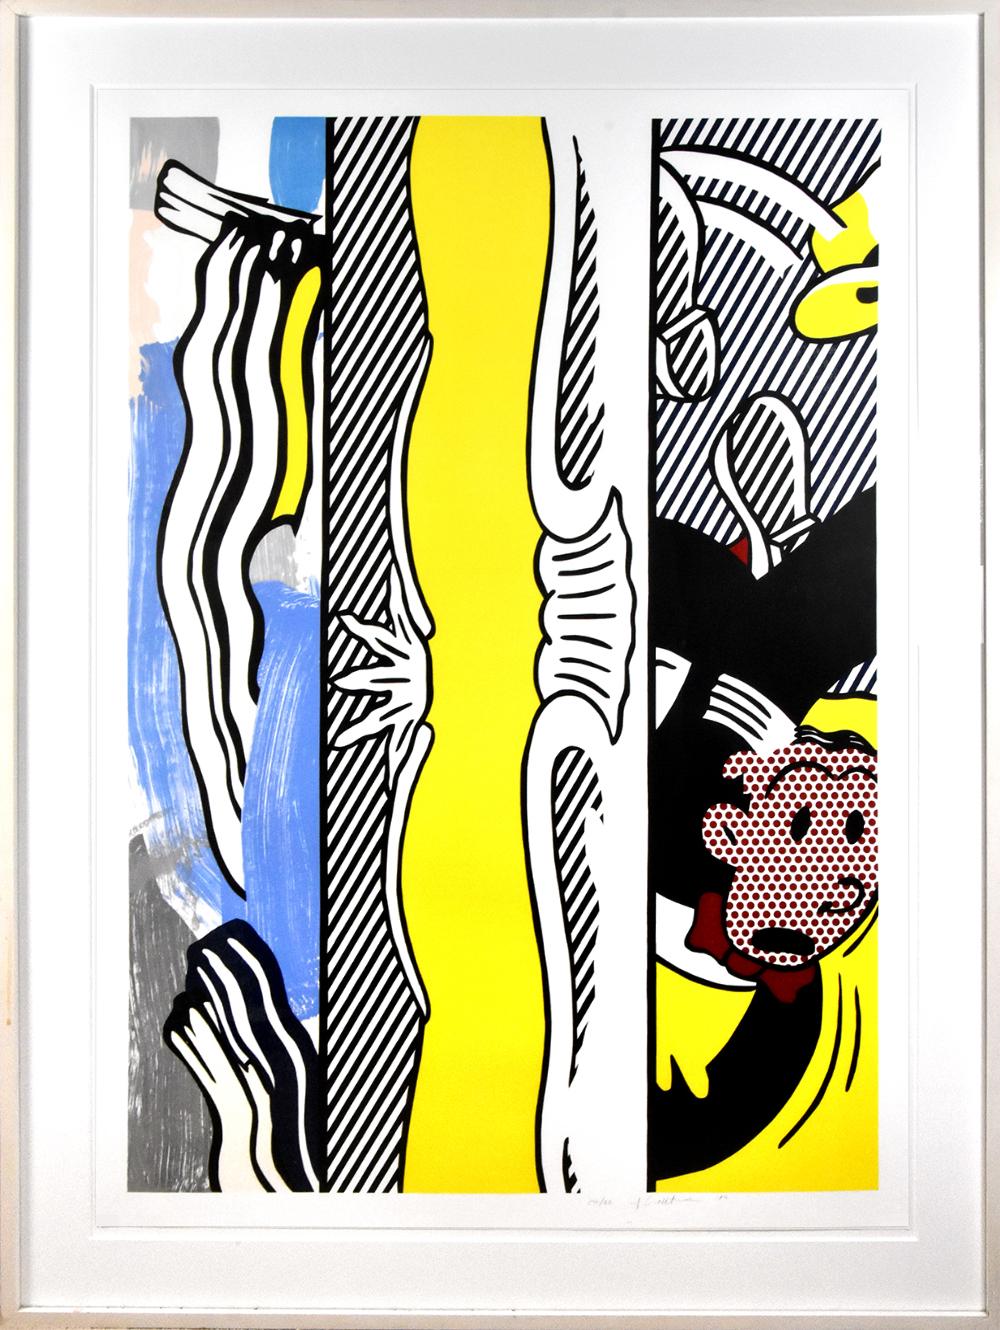 Two Paintings: Dagwood - Print by Roy Lichtenstein